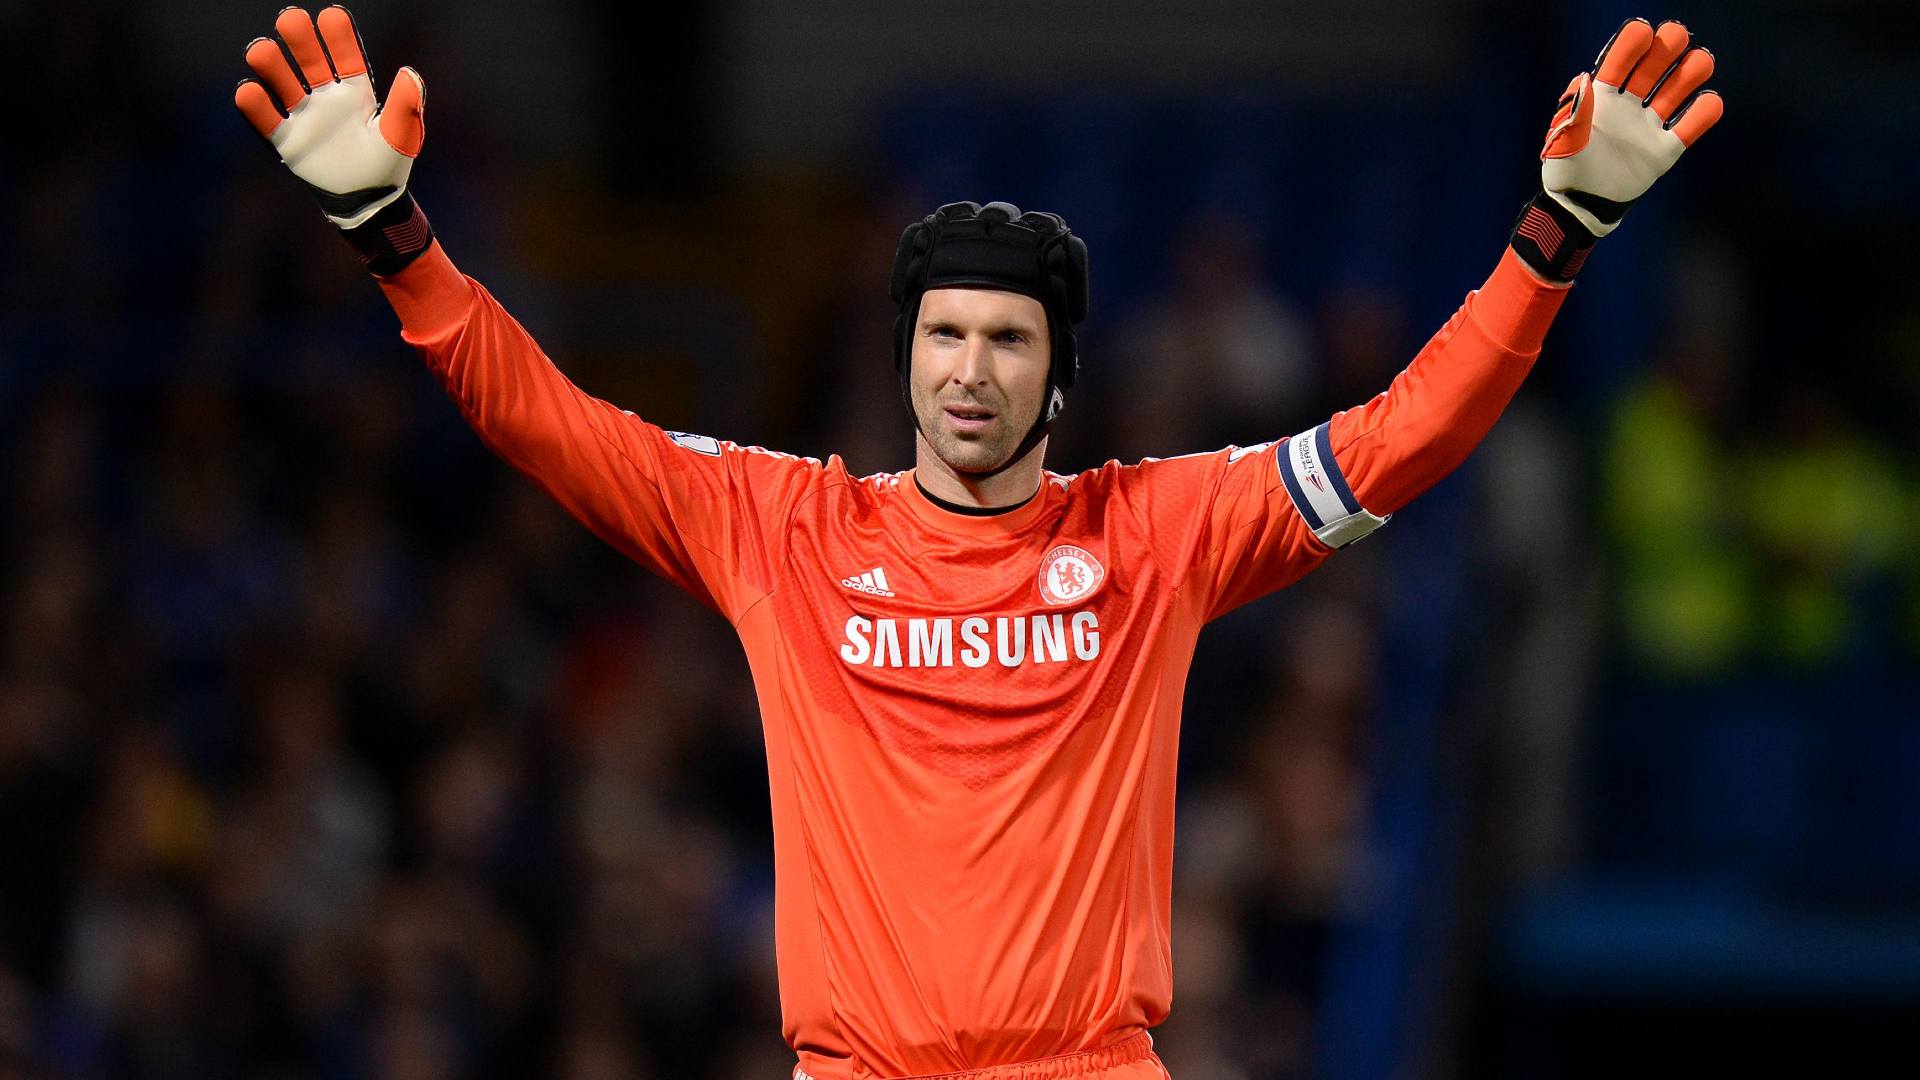 Petr Cech for Chelsea, Credit: Twitter/@ChelseaFC